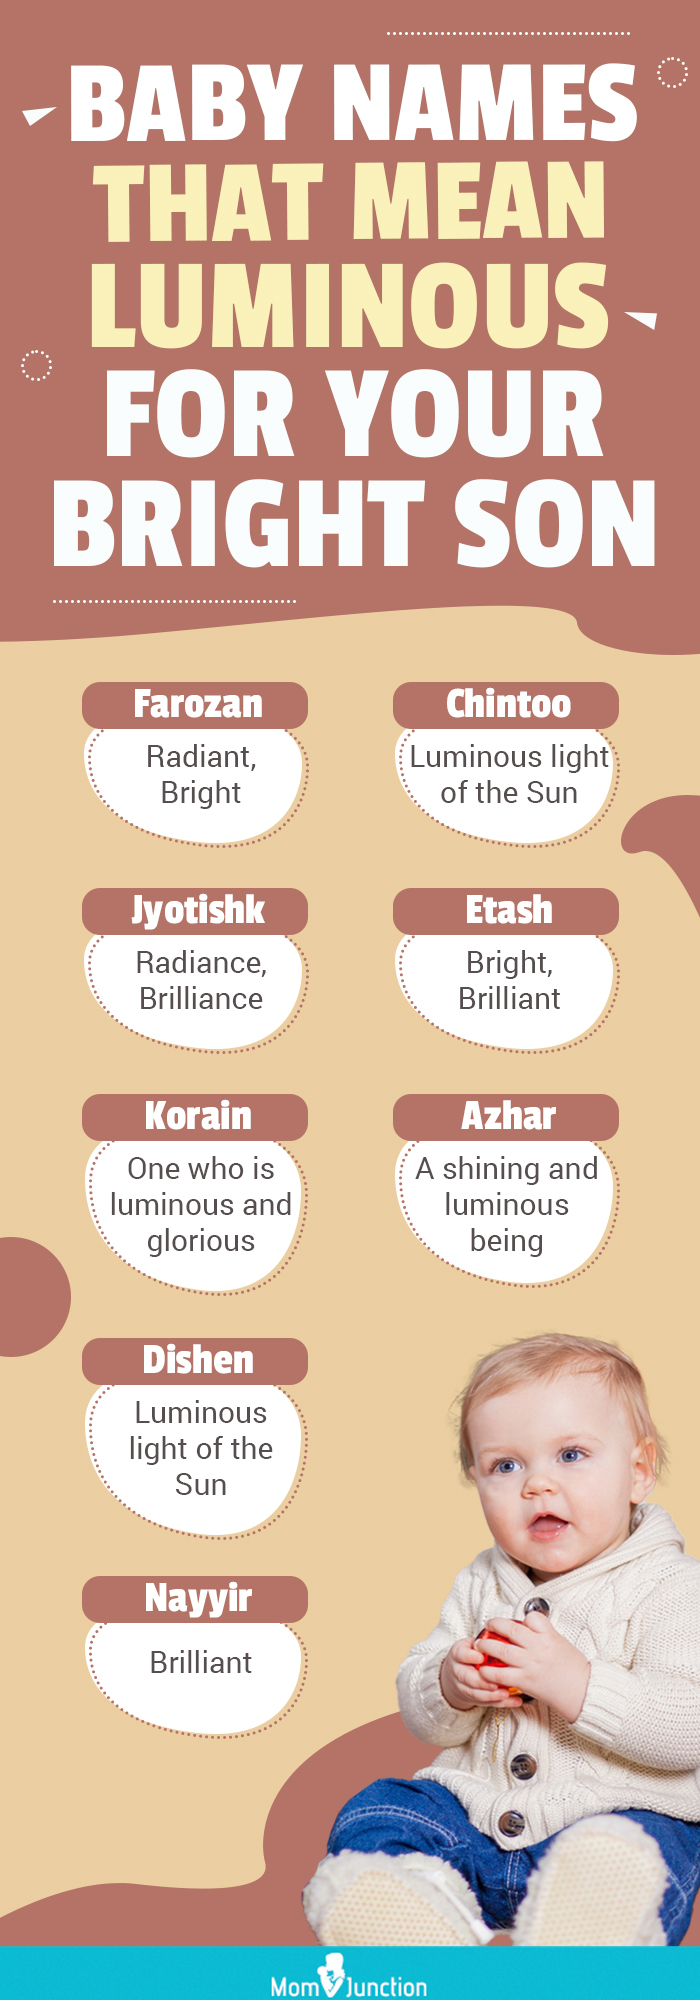 Baby Names That Mean Luminous For Your Bright Son (infographic)